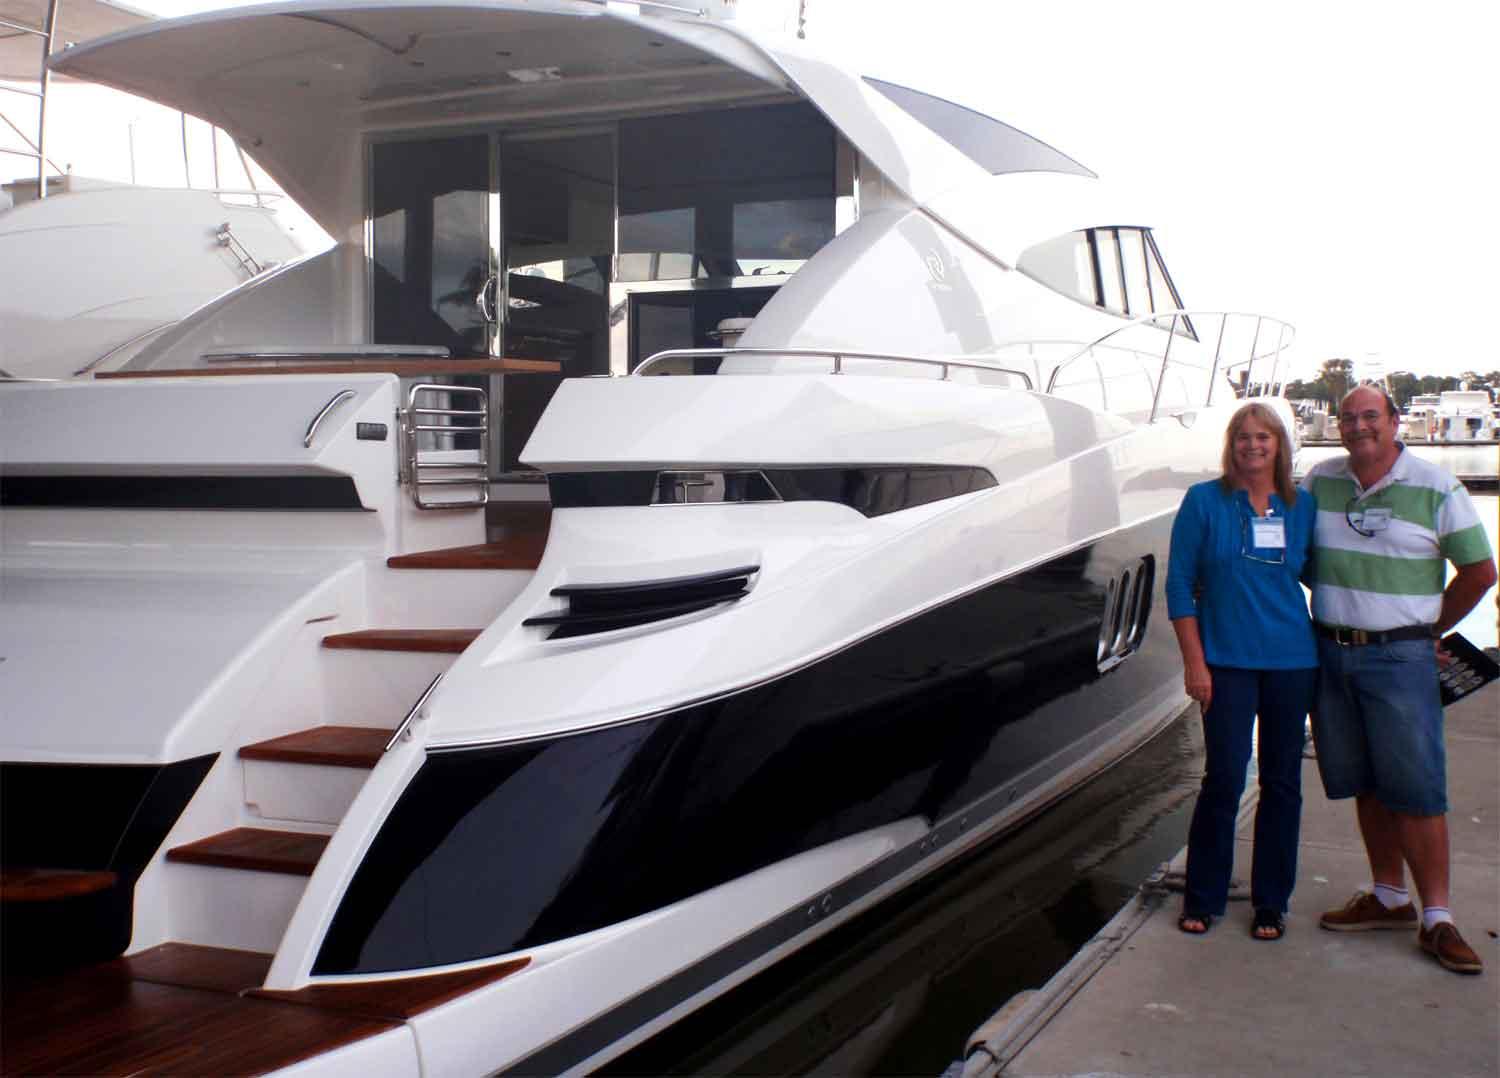 NEWS - Riviera Syndication at Sydney Boat Show